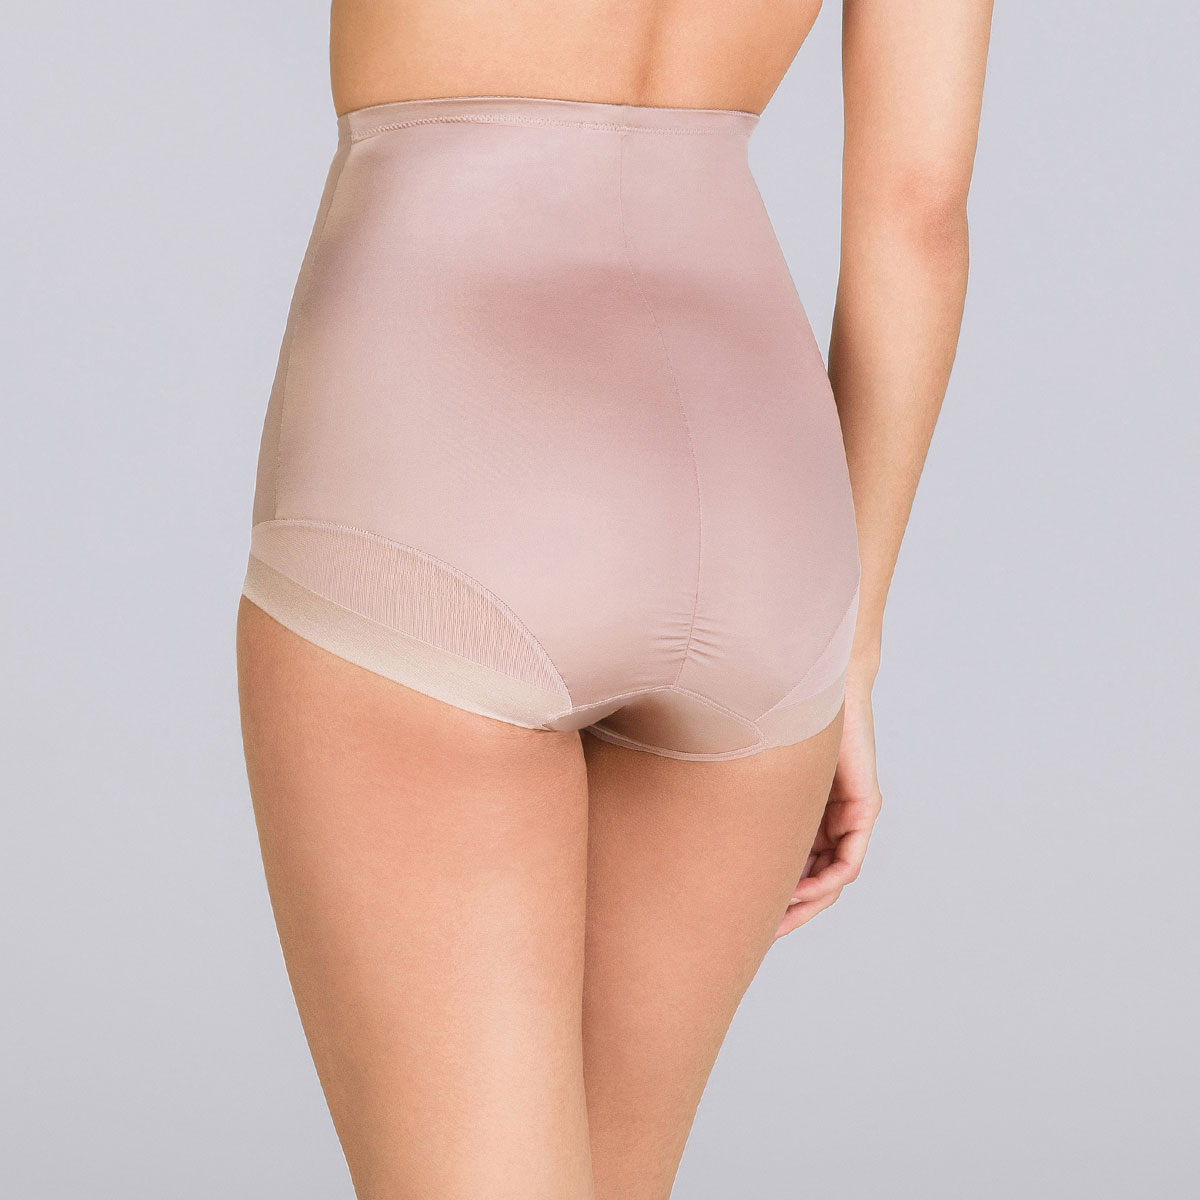 gaine ventre plat invisible playtex